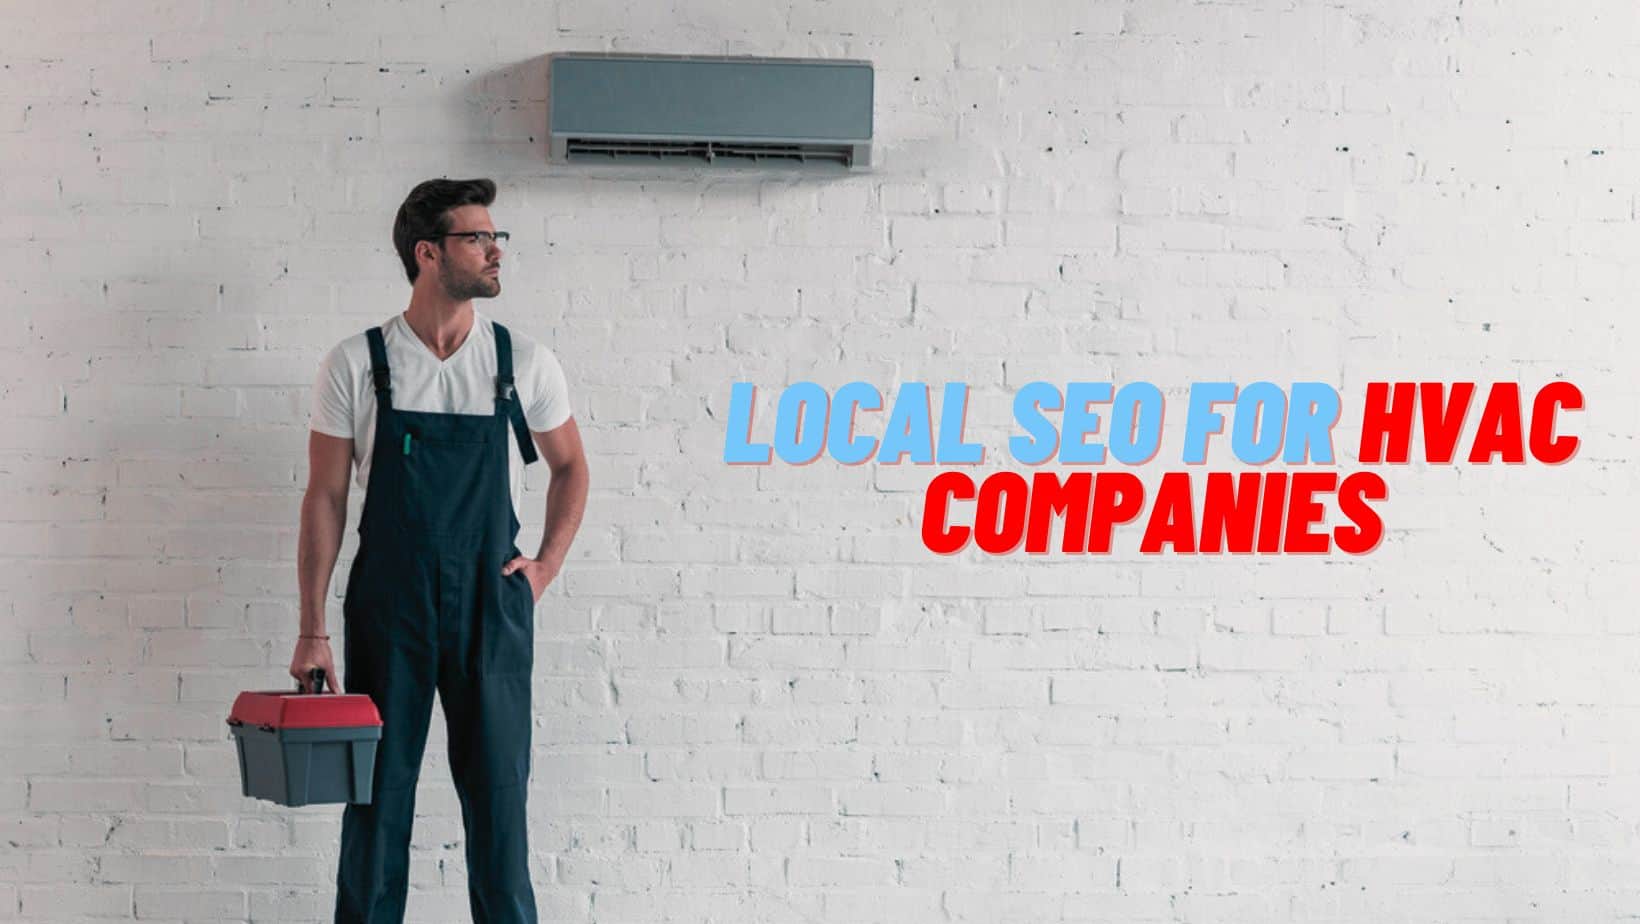 Local SEO for HVAC Companies: Getting Found in Your Service Areas